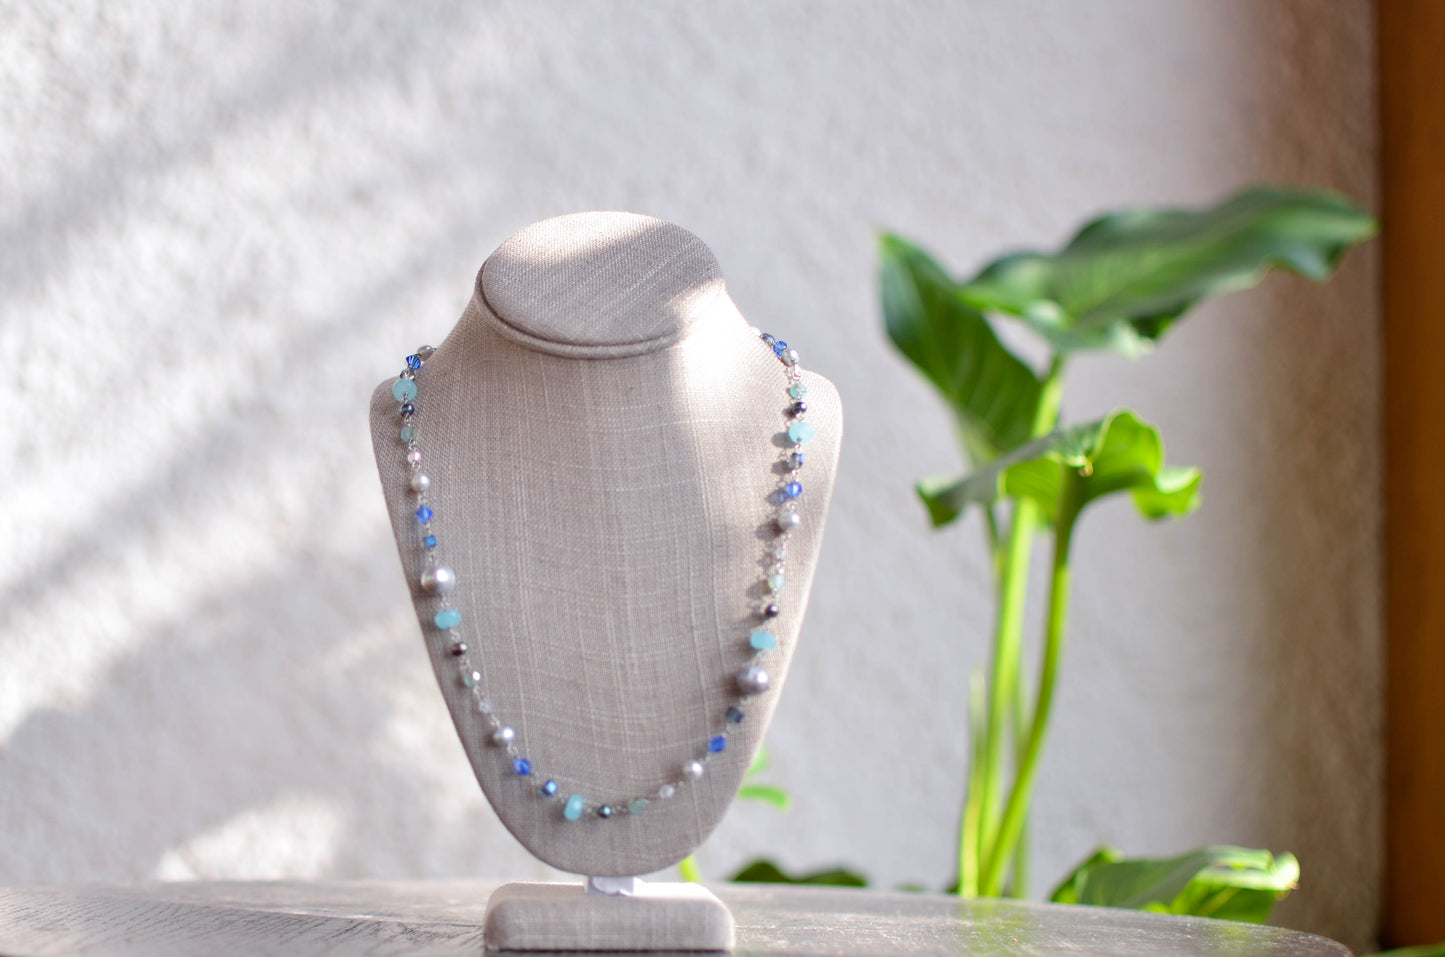 Long Necklace with Turquoise Beads and Silver Pearls - Pearls4Girls